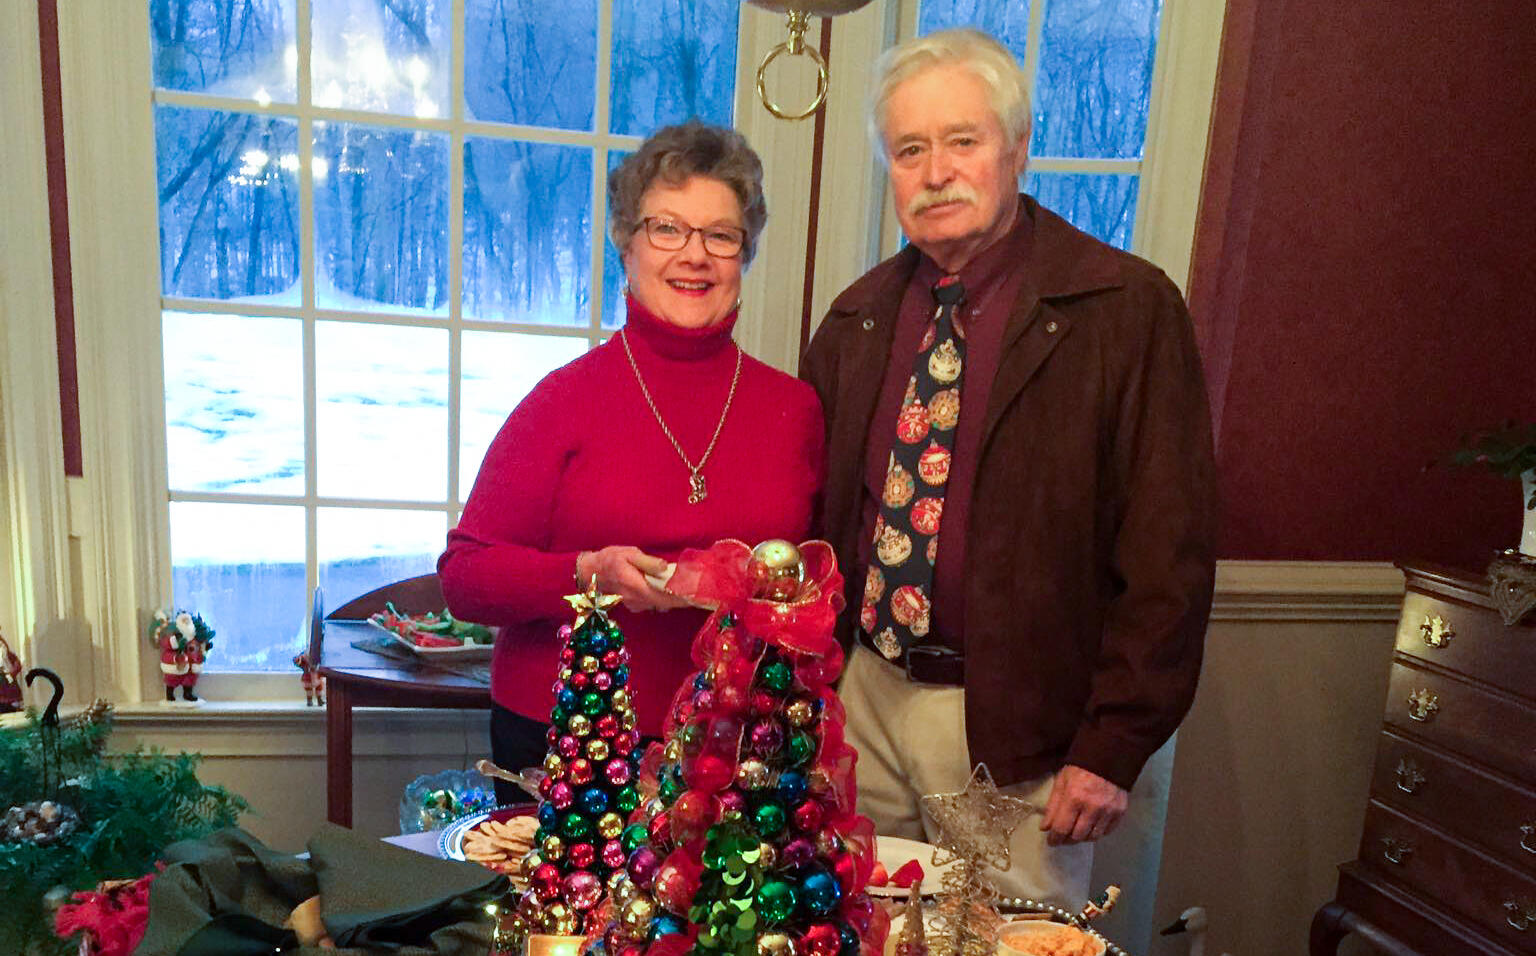 Two people stand behind a table with holiday decorations.